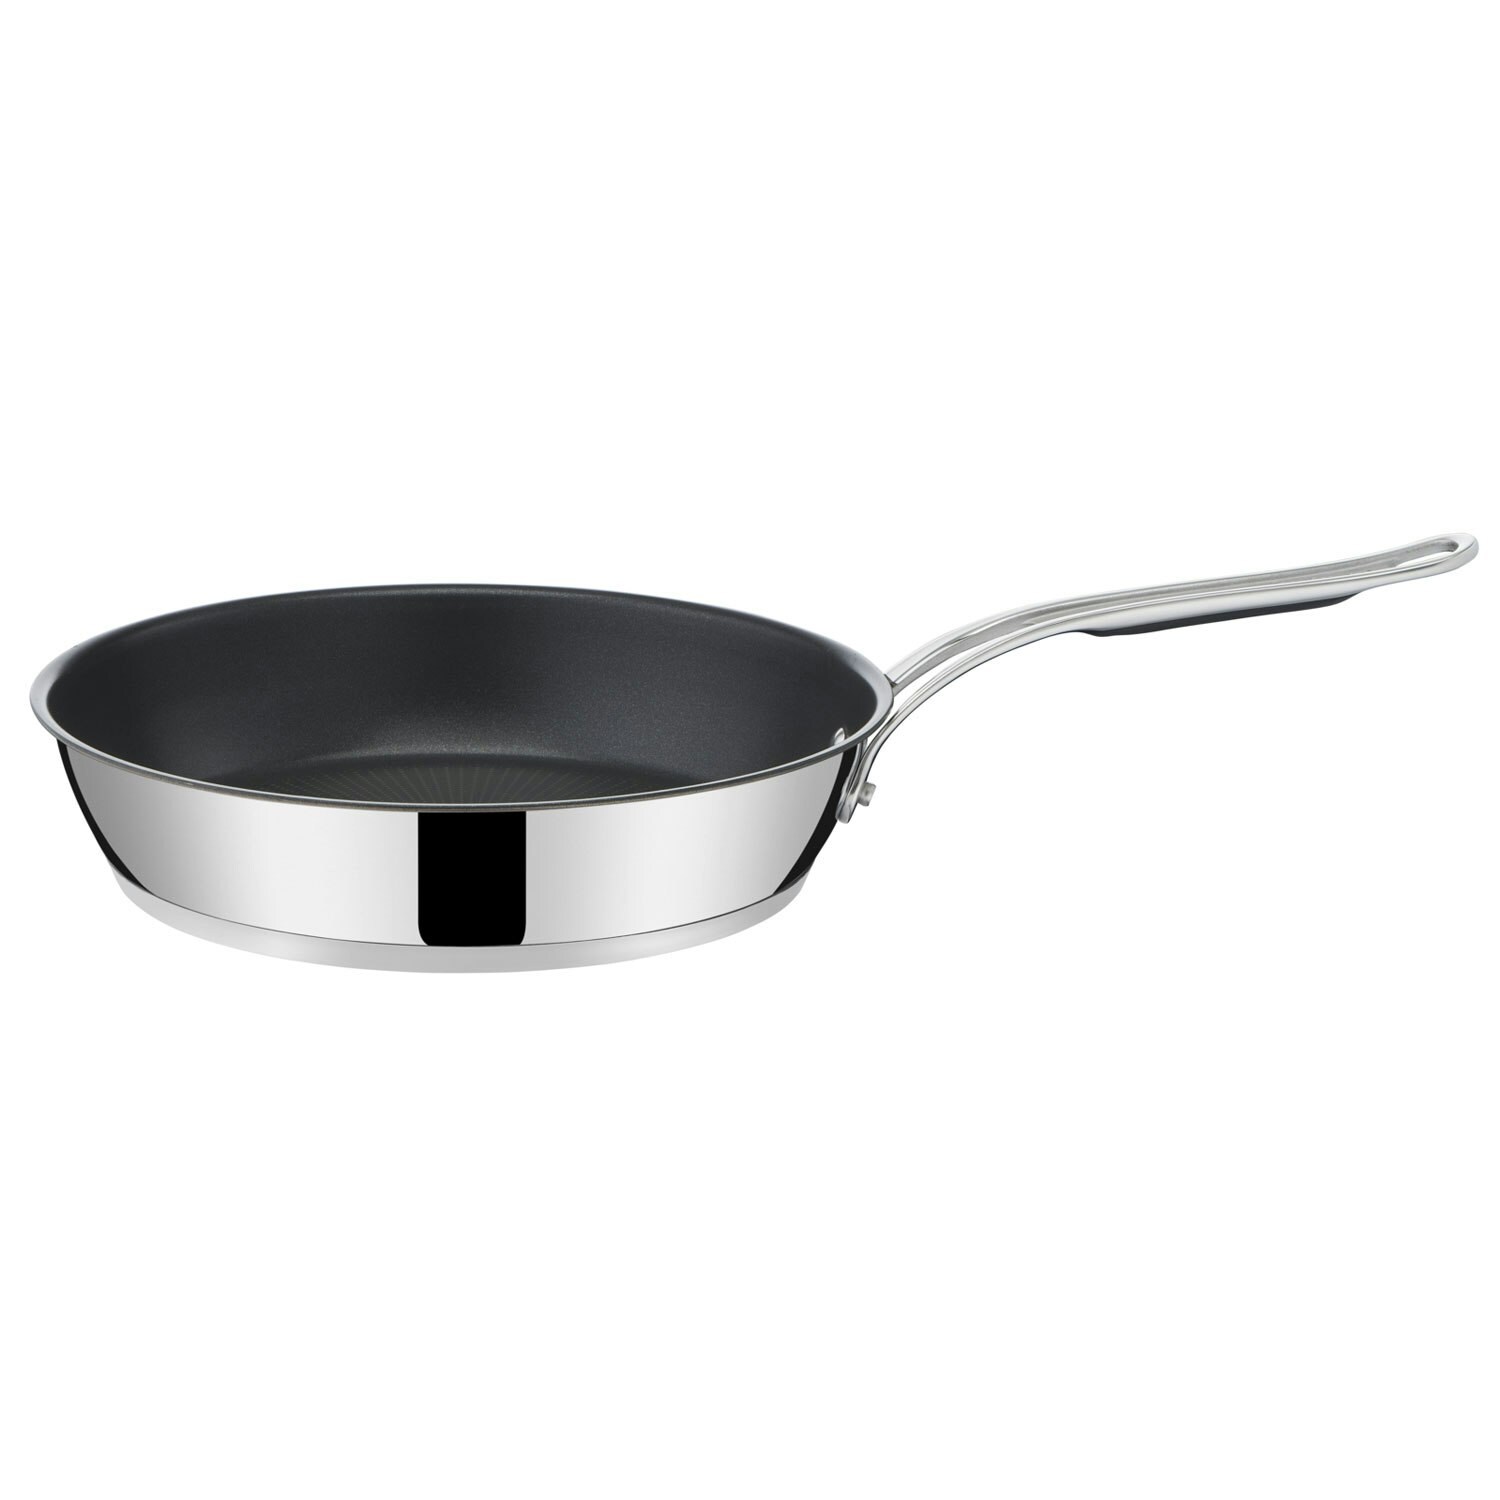 Tefal Jamie Oliver Quick & Easy Stainless Steel Fry Pan 28cm, 11